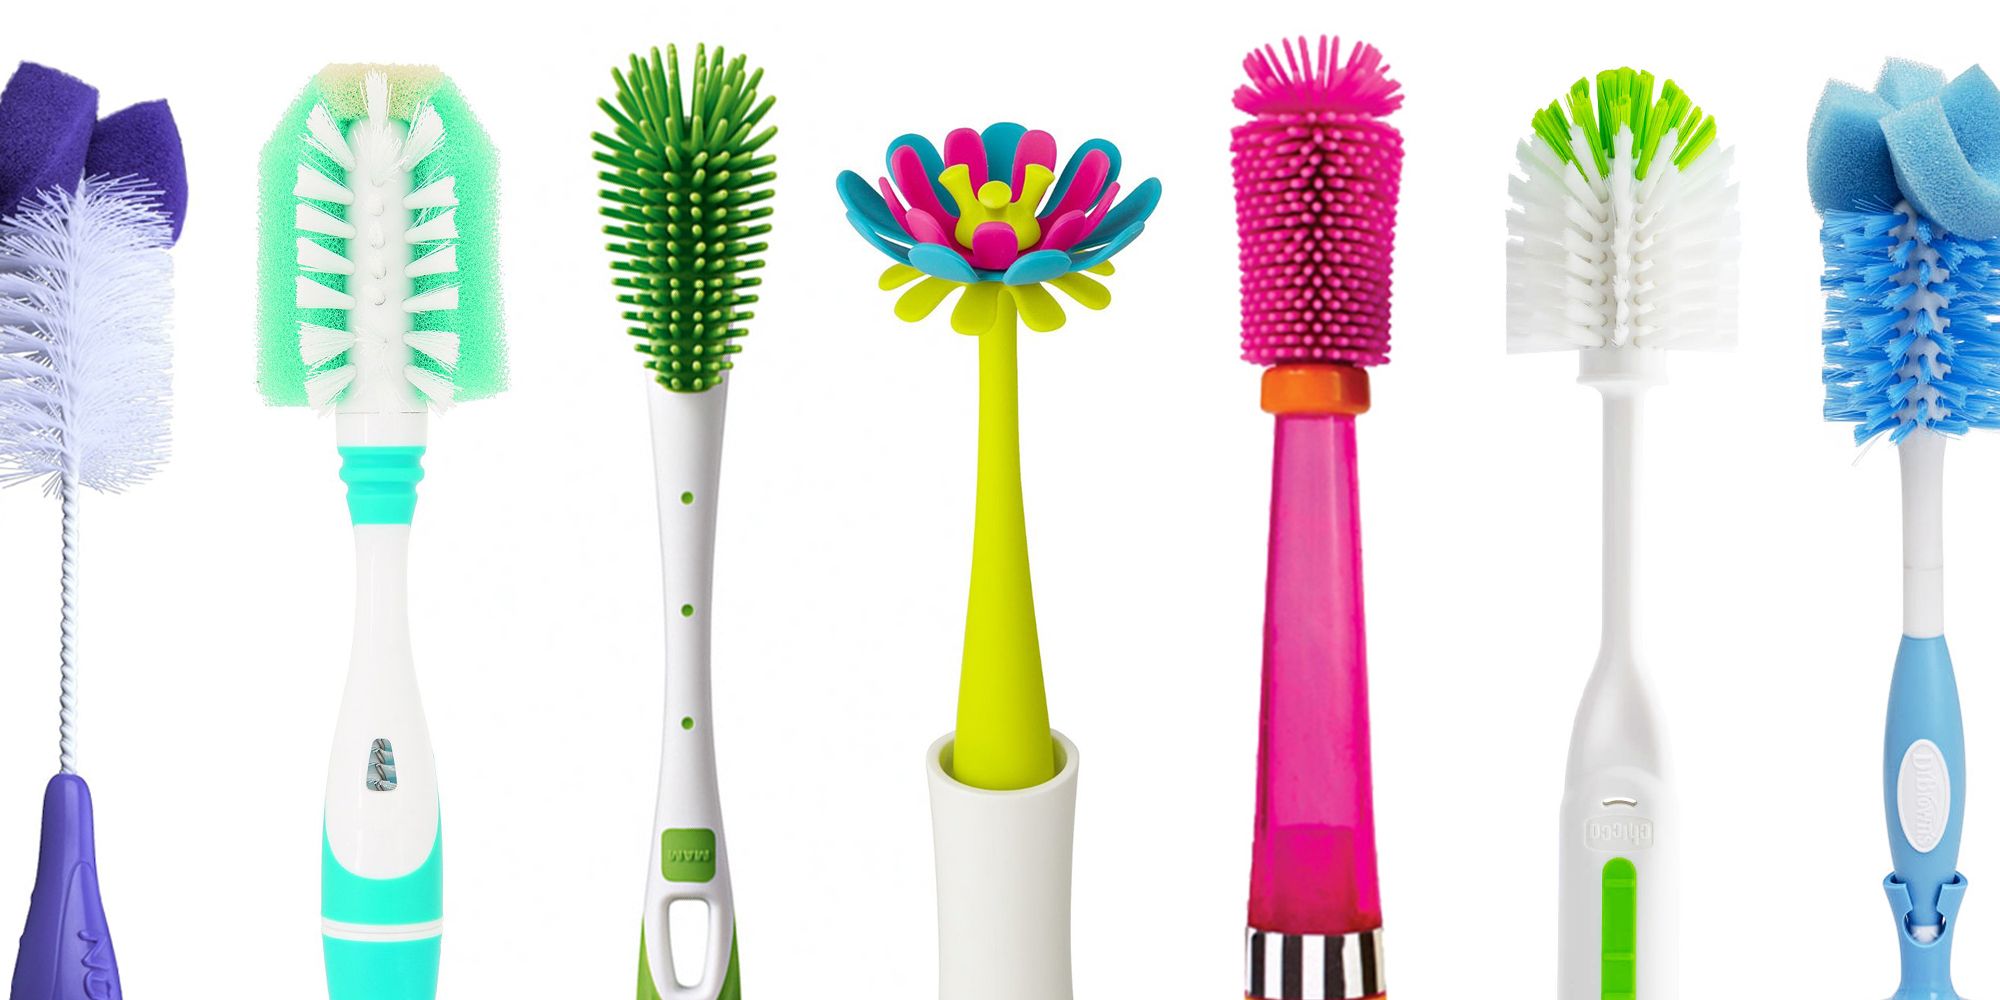 15 Best Bottle Brushes of 2018 - Baby Bottle Brushes and Cleaning Sets